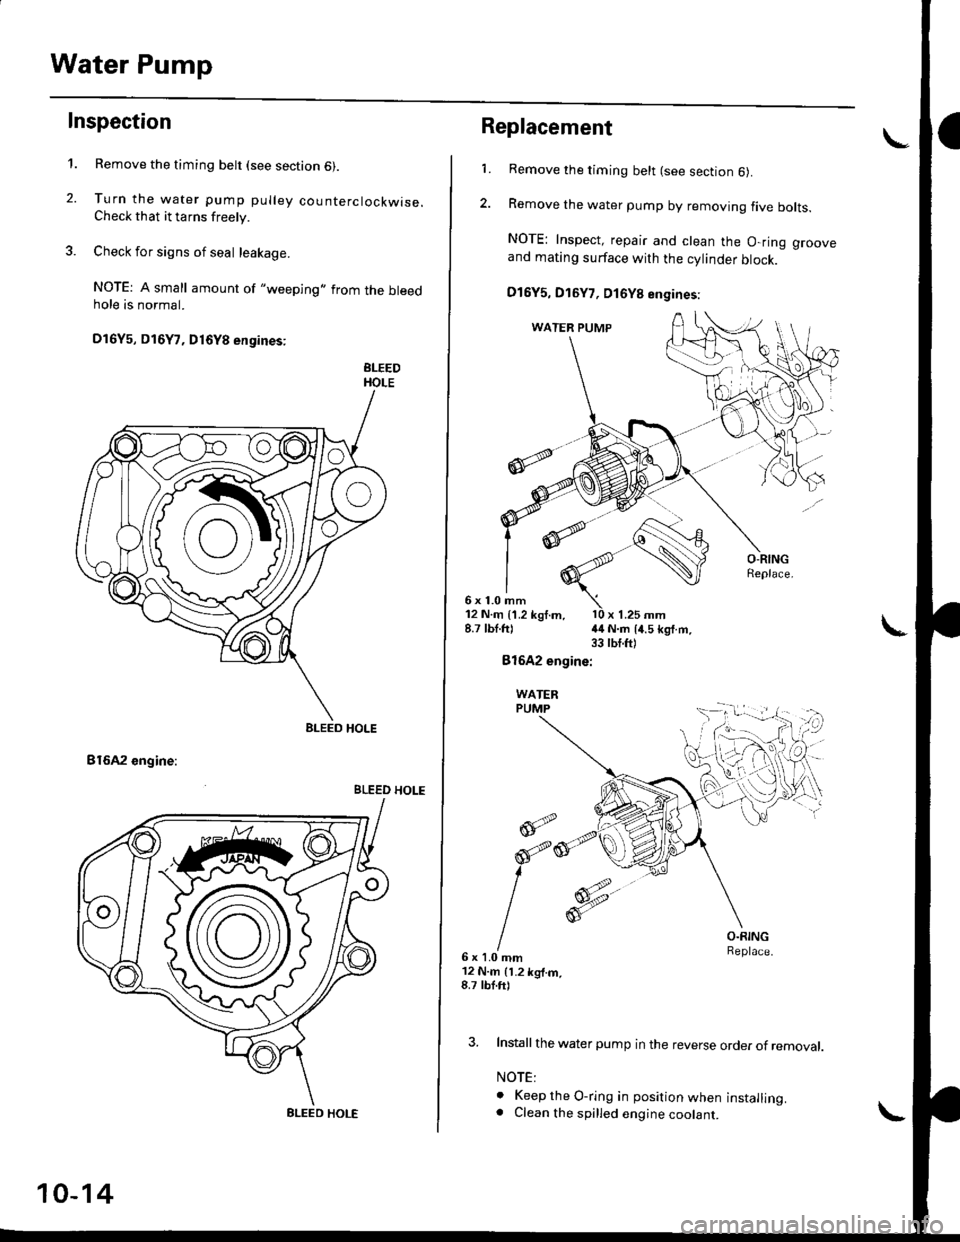 HONDA CIVIC 1996 6.G User Guide Water Pump
Inspection
t.
2.
Remove the timing belt (see section 6).
Turn the water pump pulley counterclockwise.Check that it tarns freely.
Check for signs of seal leakage.
NOTE: A small amount of "w